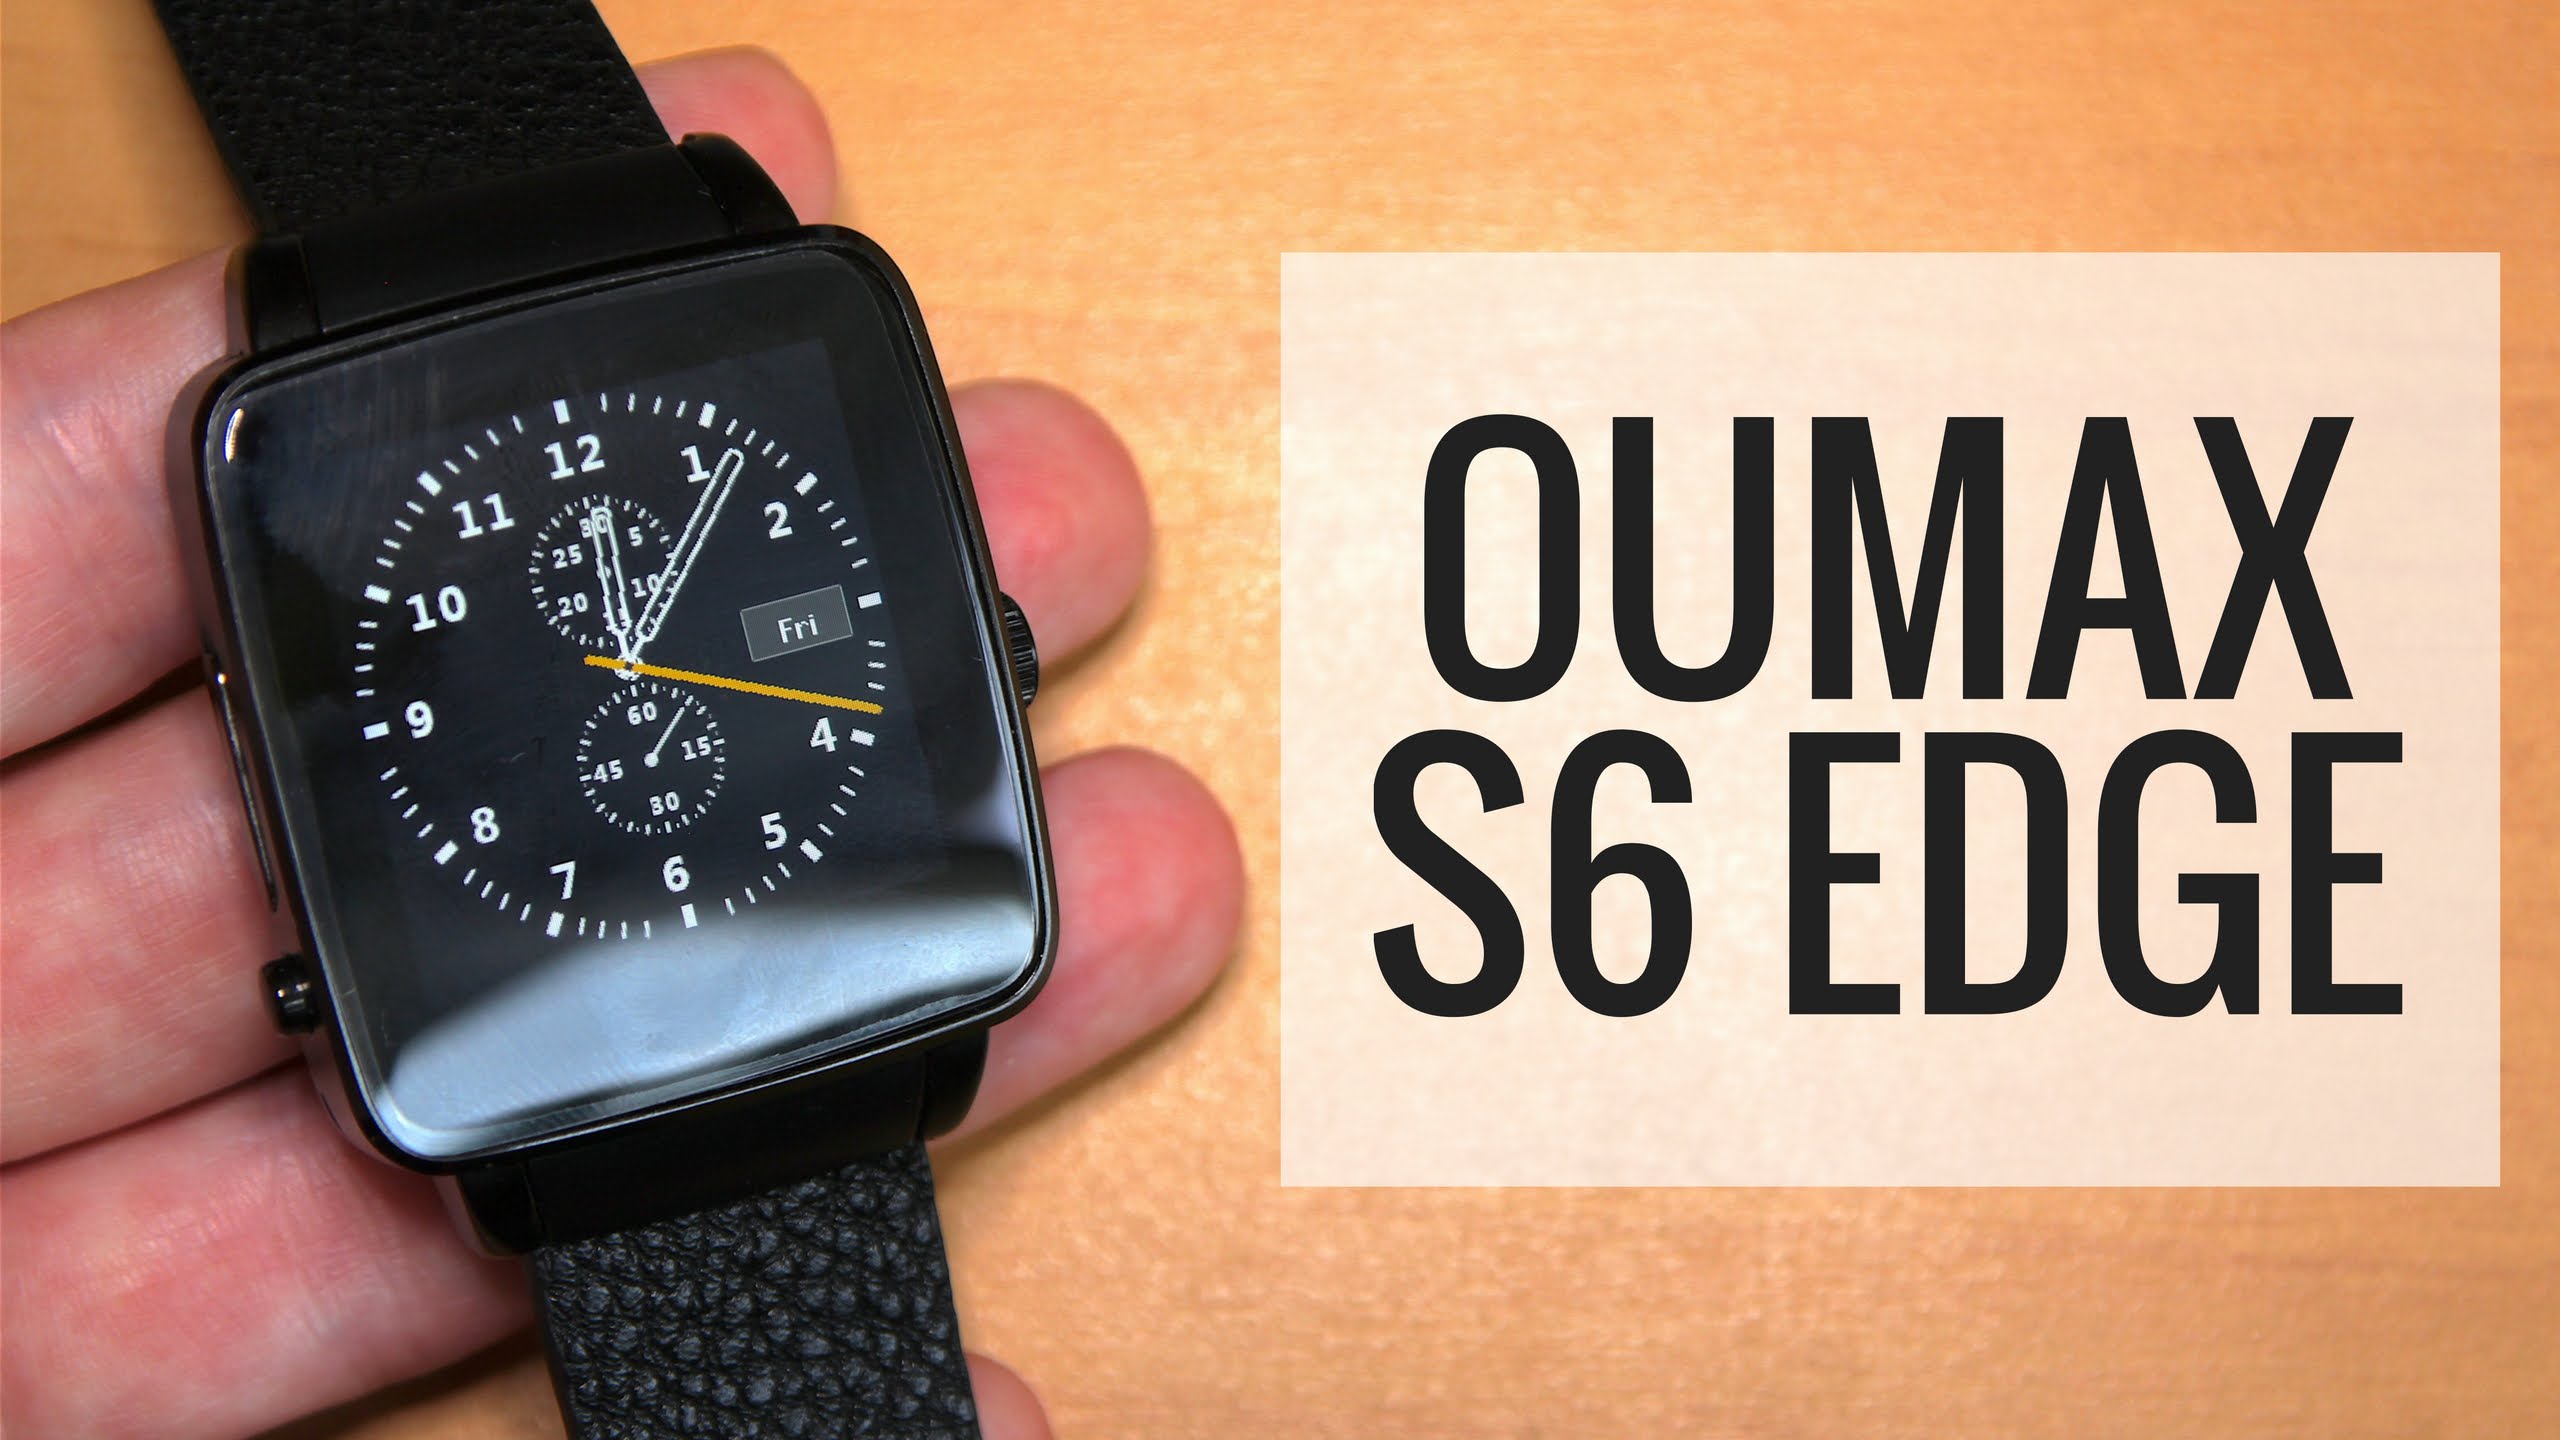 Oumax S6 Edge Smartwatch Review